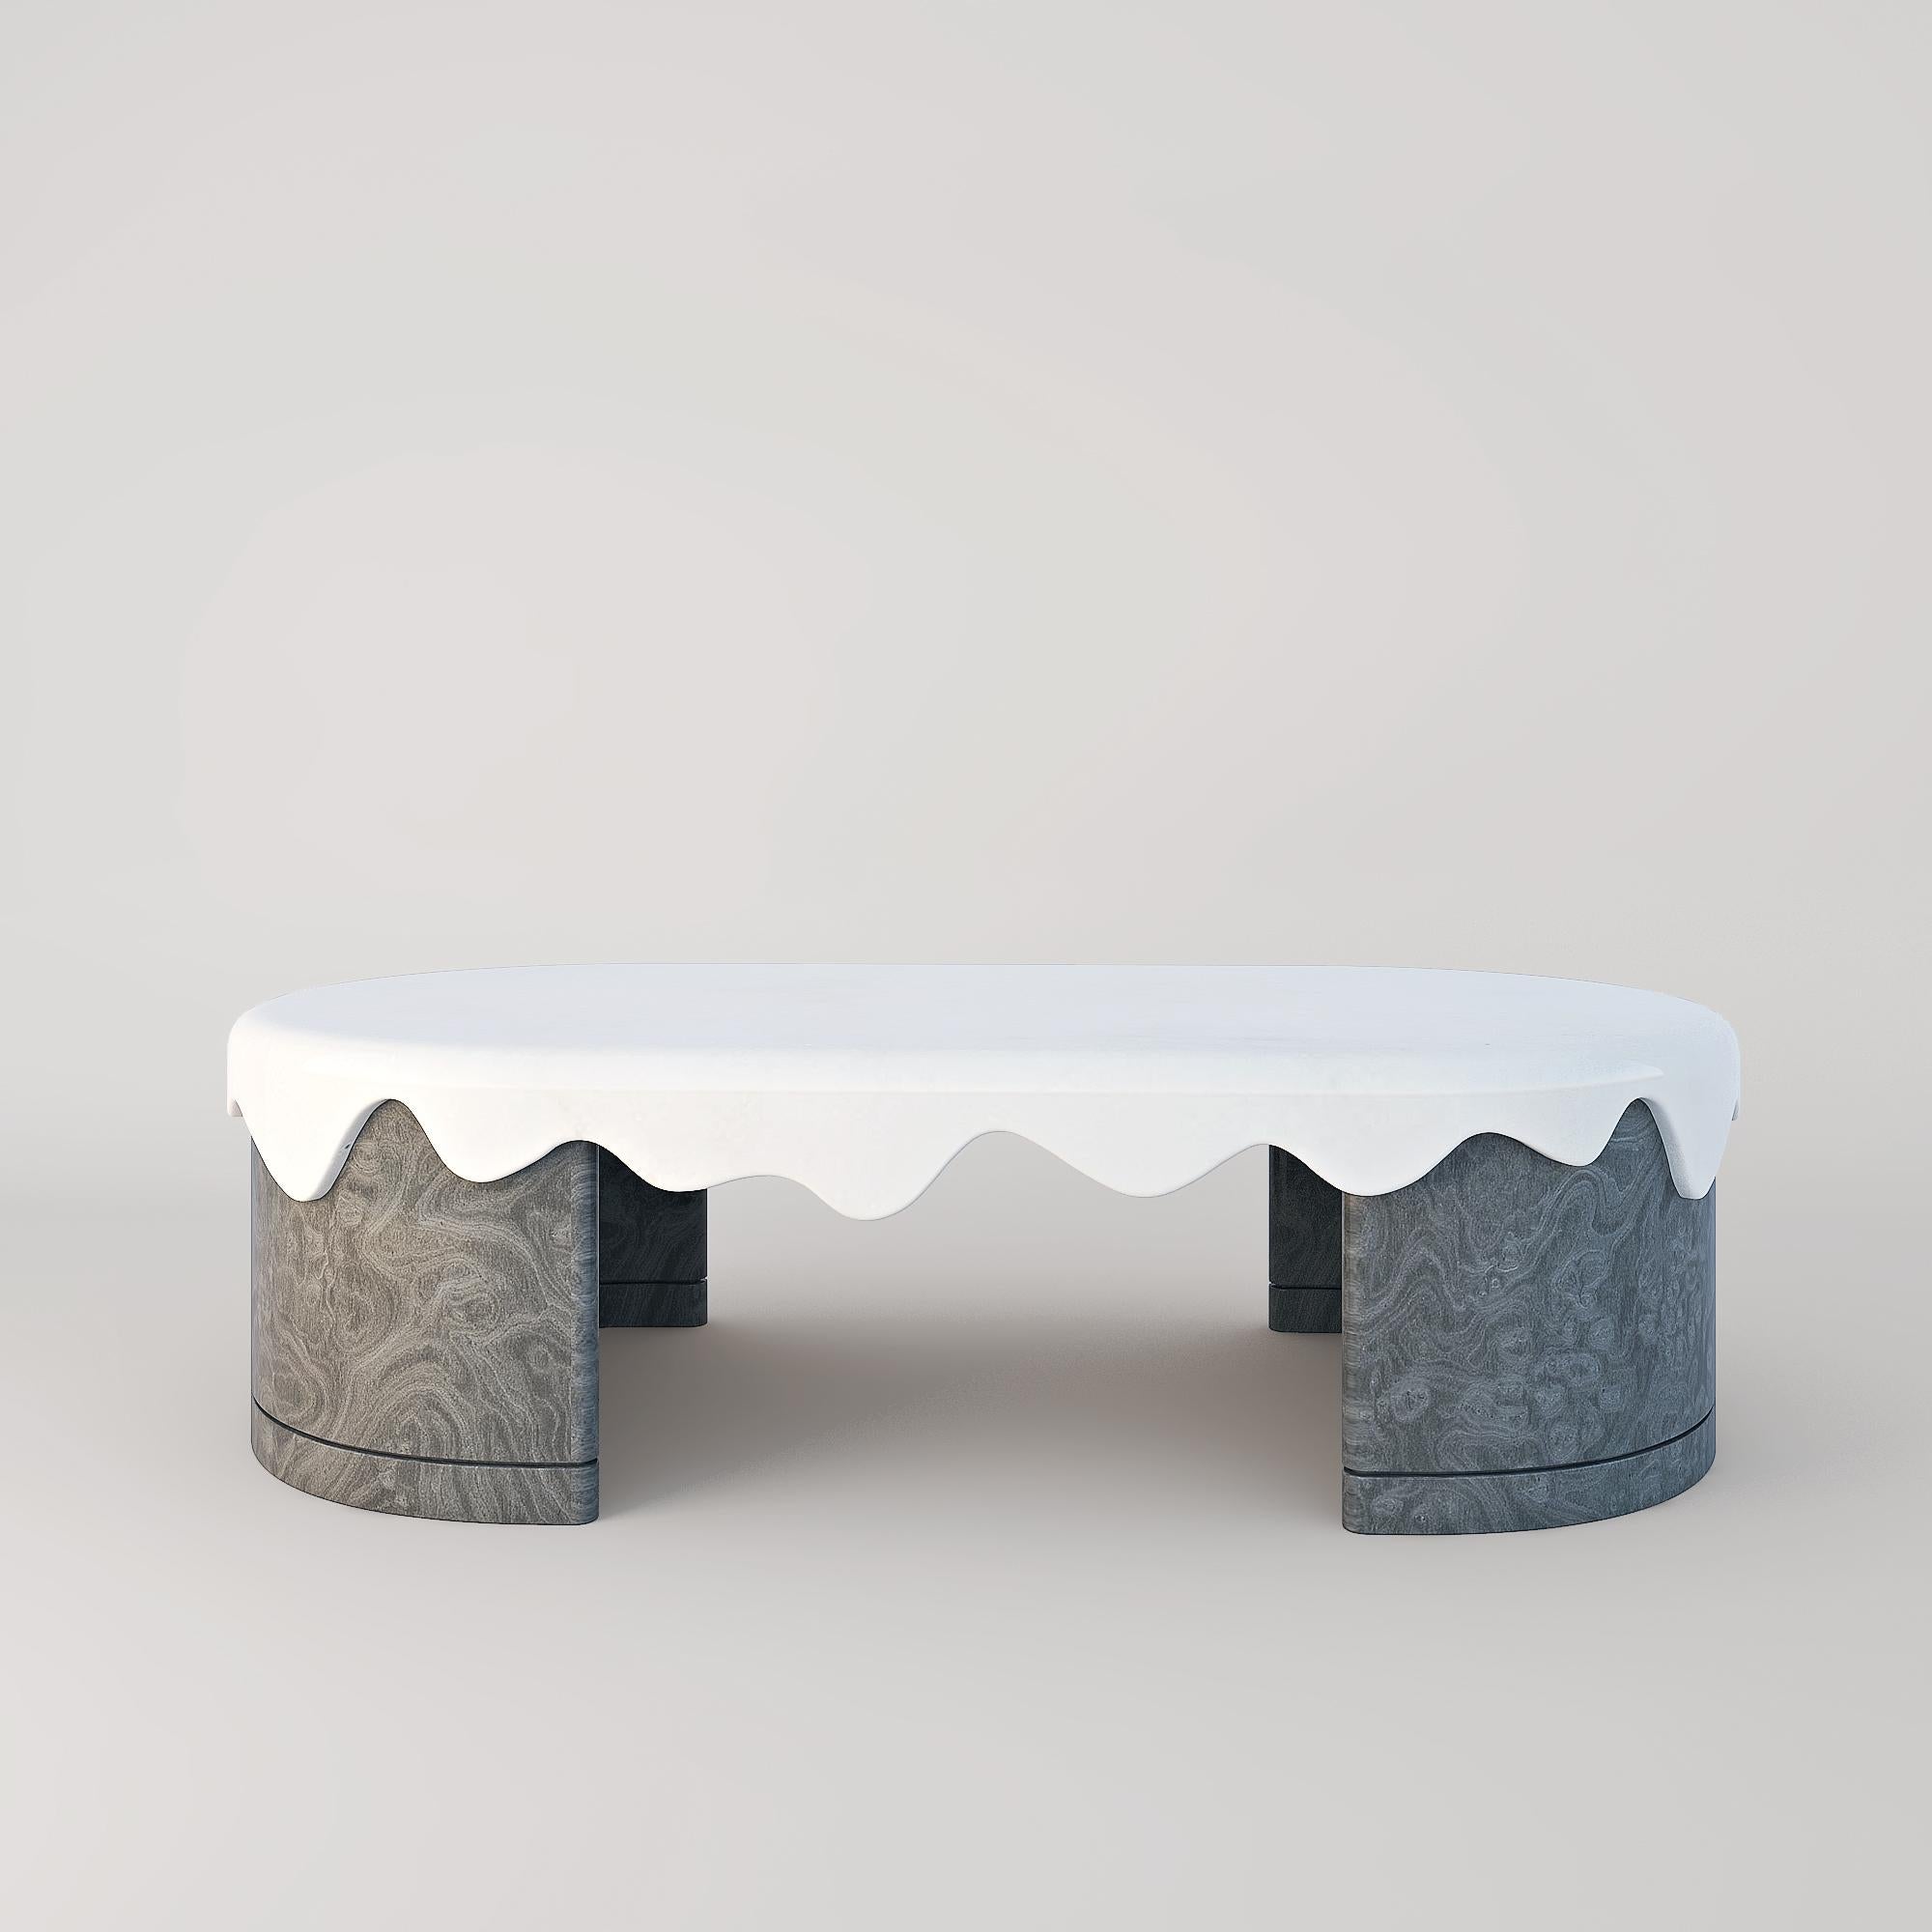 Blurring the lines between solidity and fluidity, the Melt collection leans on natural stones and wood to form a three-piece collection of tables while each piece plays with complementing and contrasting these materials in the name of achieving